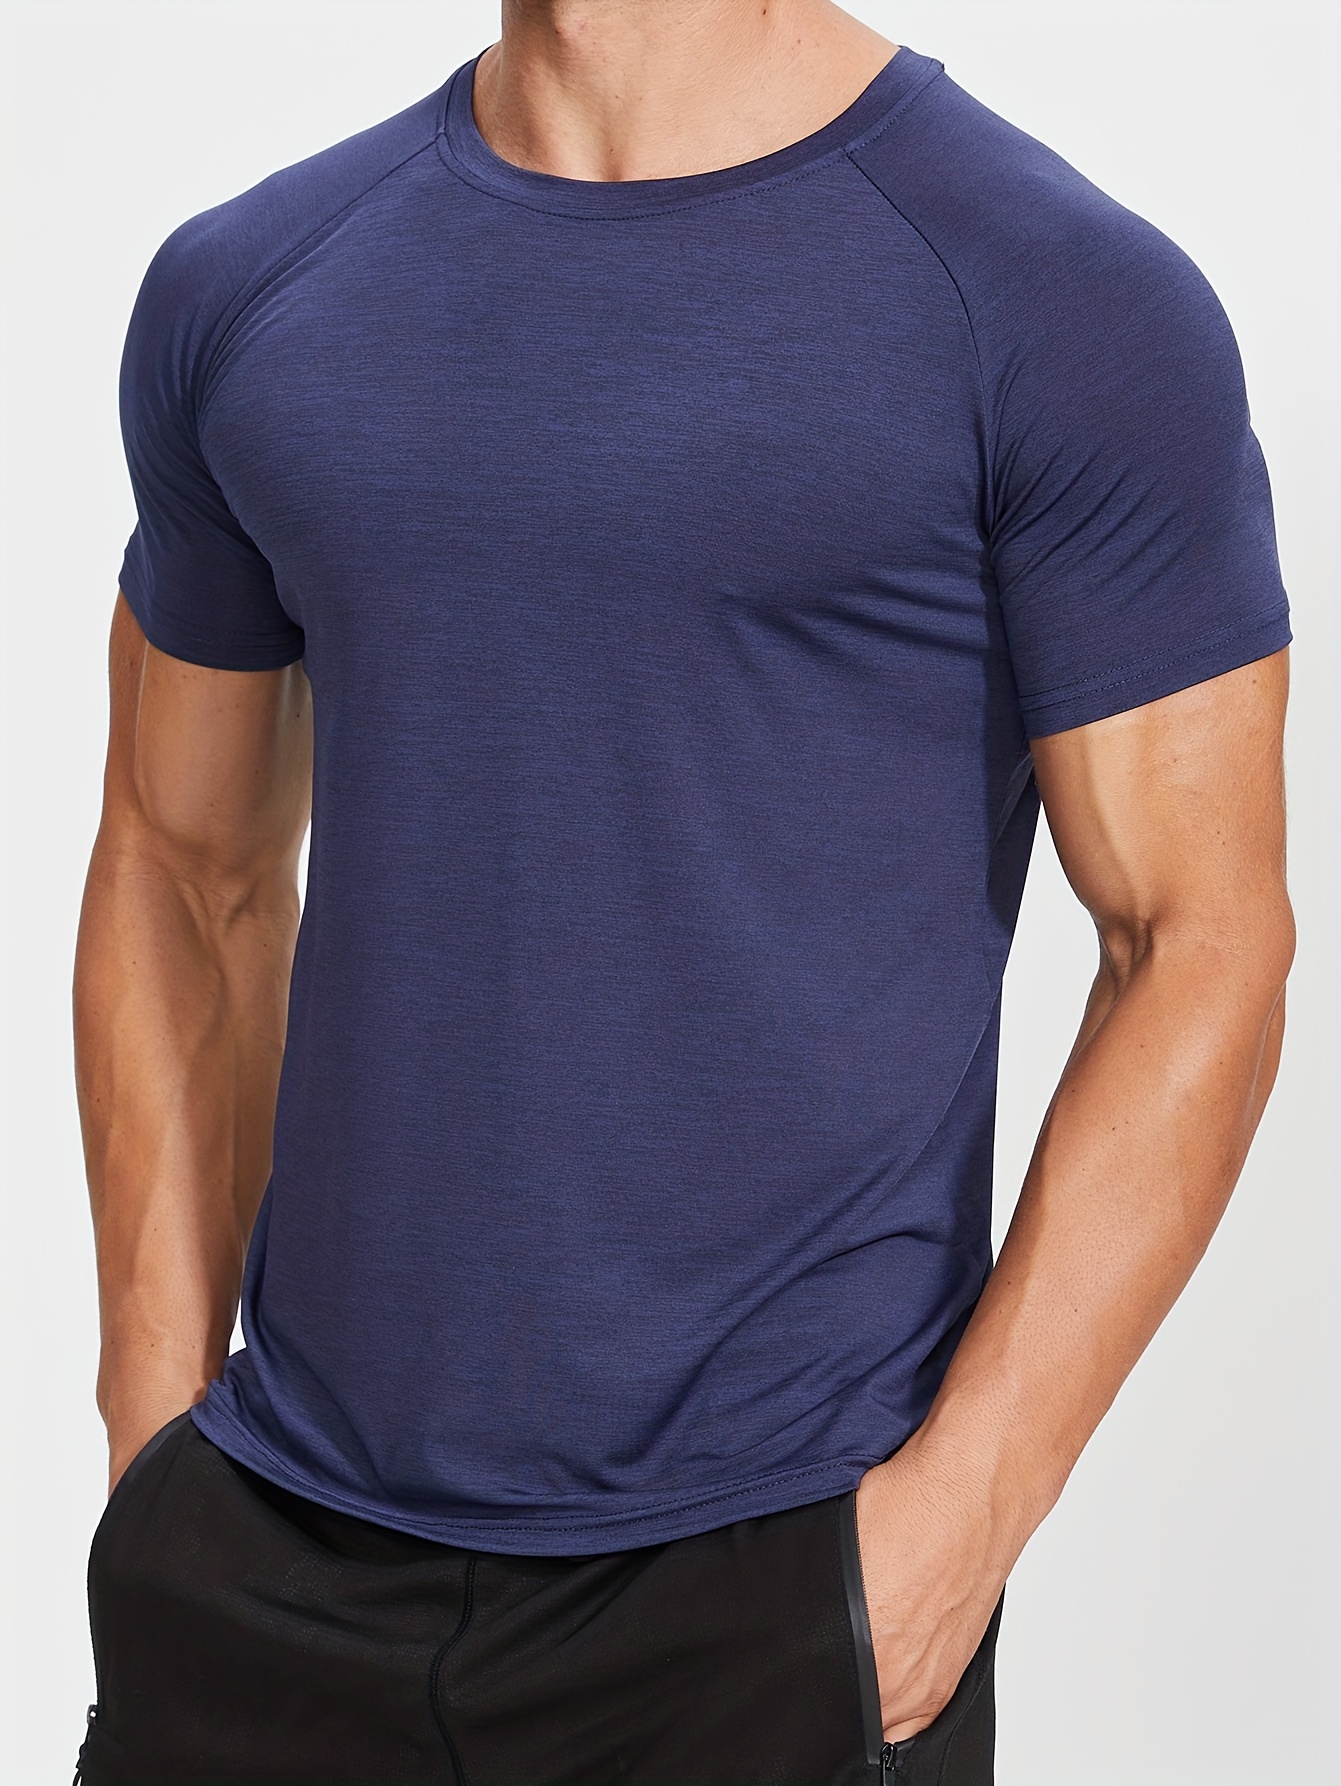 Men's Workout Outfits, 29 Athletic Gym Wear Ideas